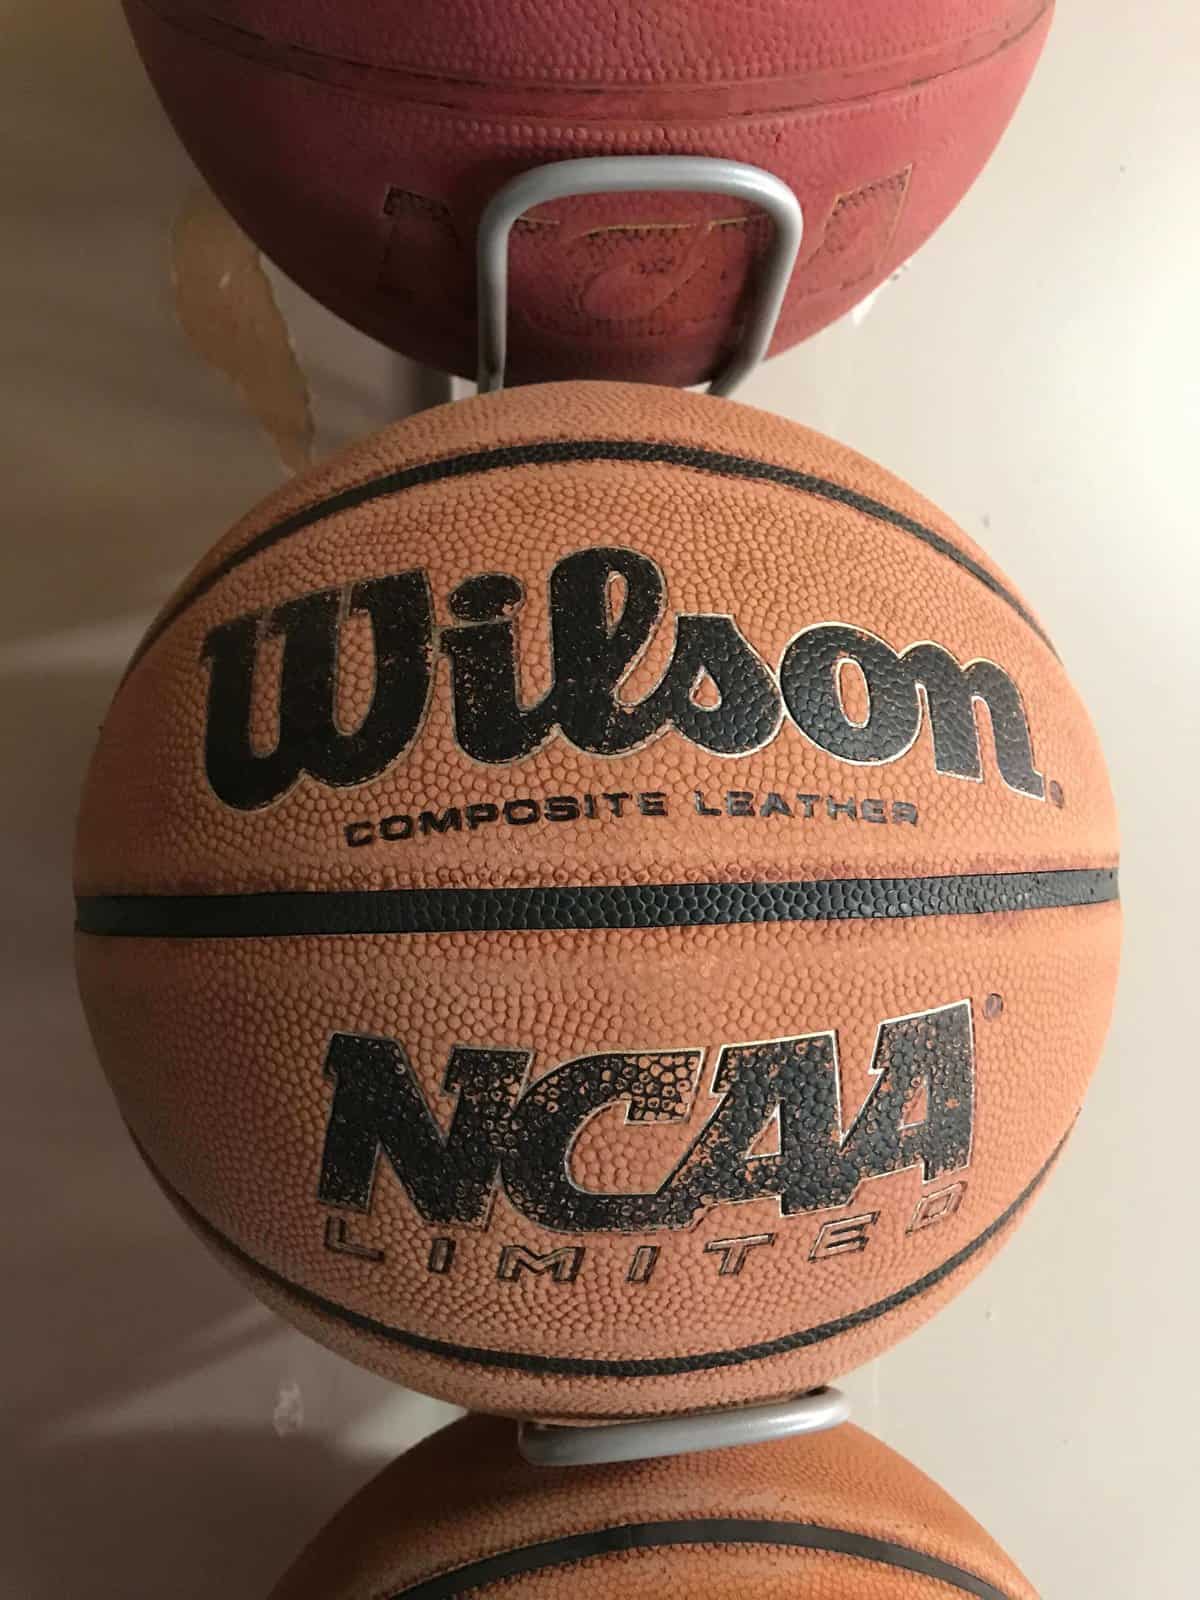 My favorite basketball, the Wilson NCAA Limited